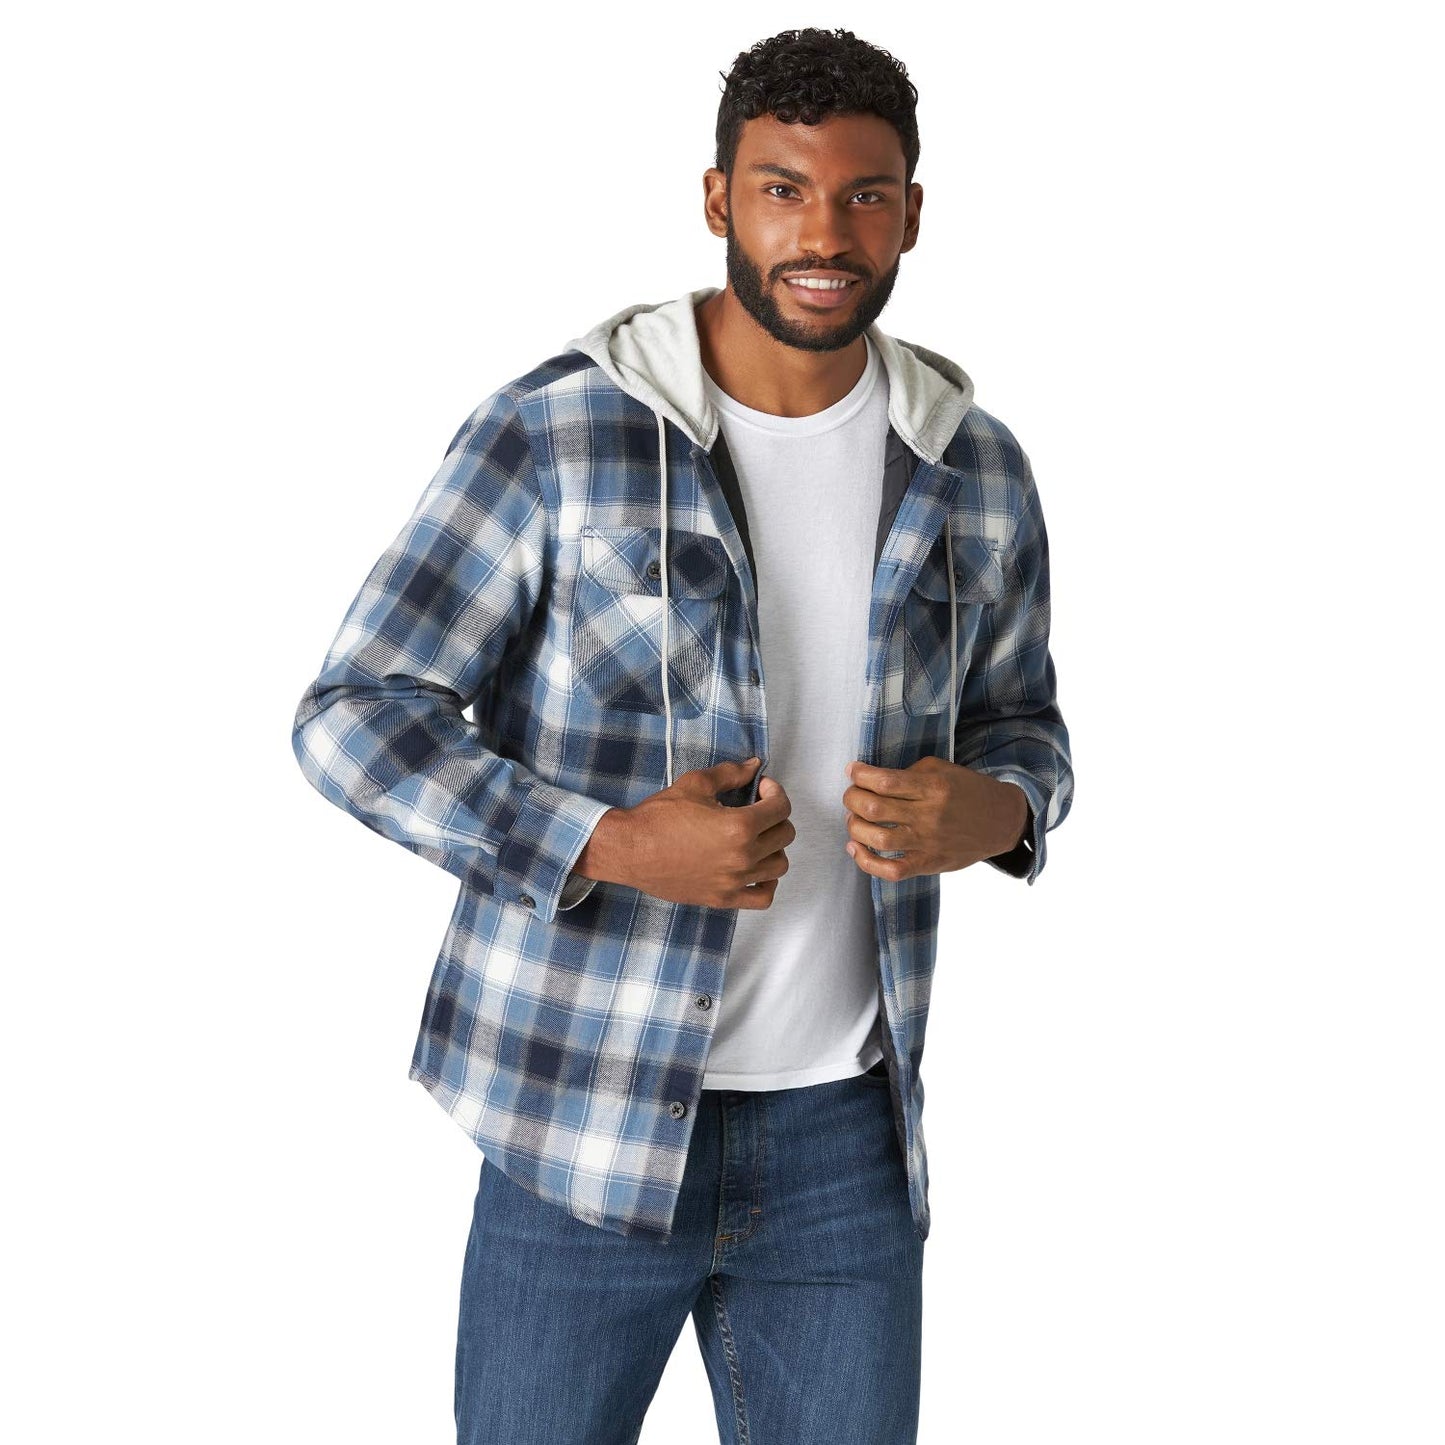 Wrangler Authentics Men's Long Sleeve Quilted Lined Flannel Shirt Jacket with Hood, Blue/Black, Medium